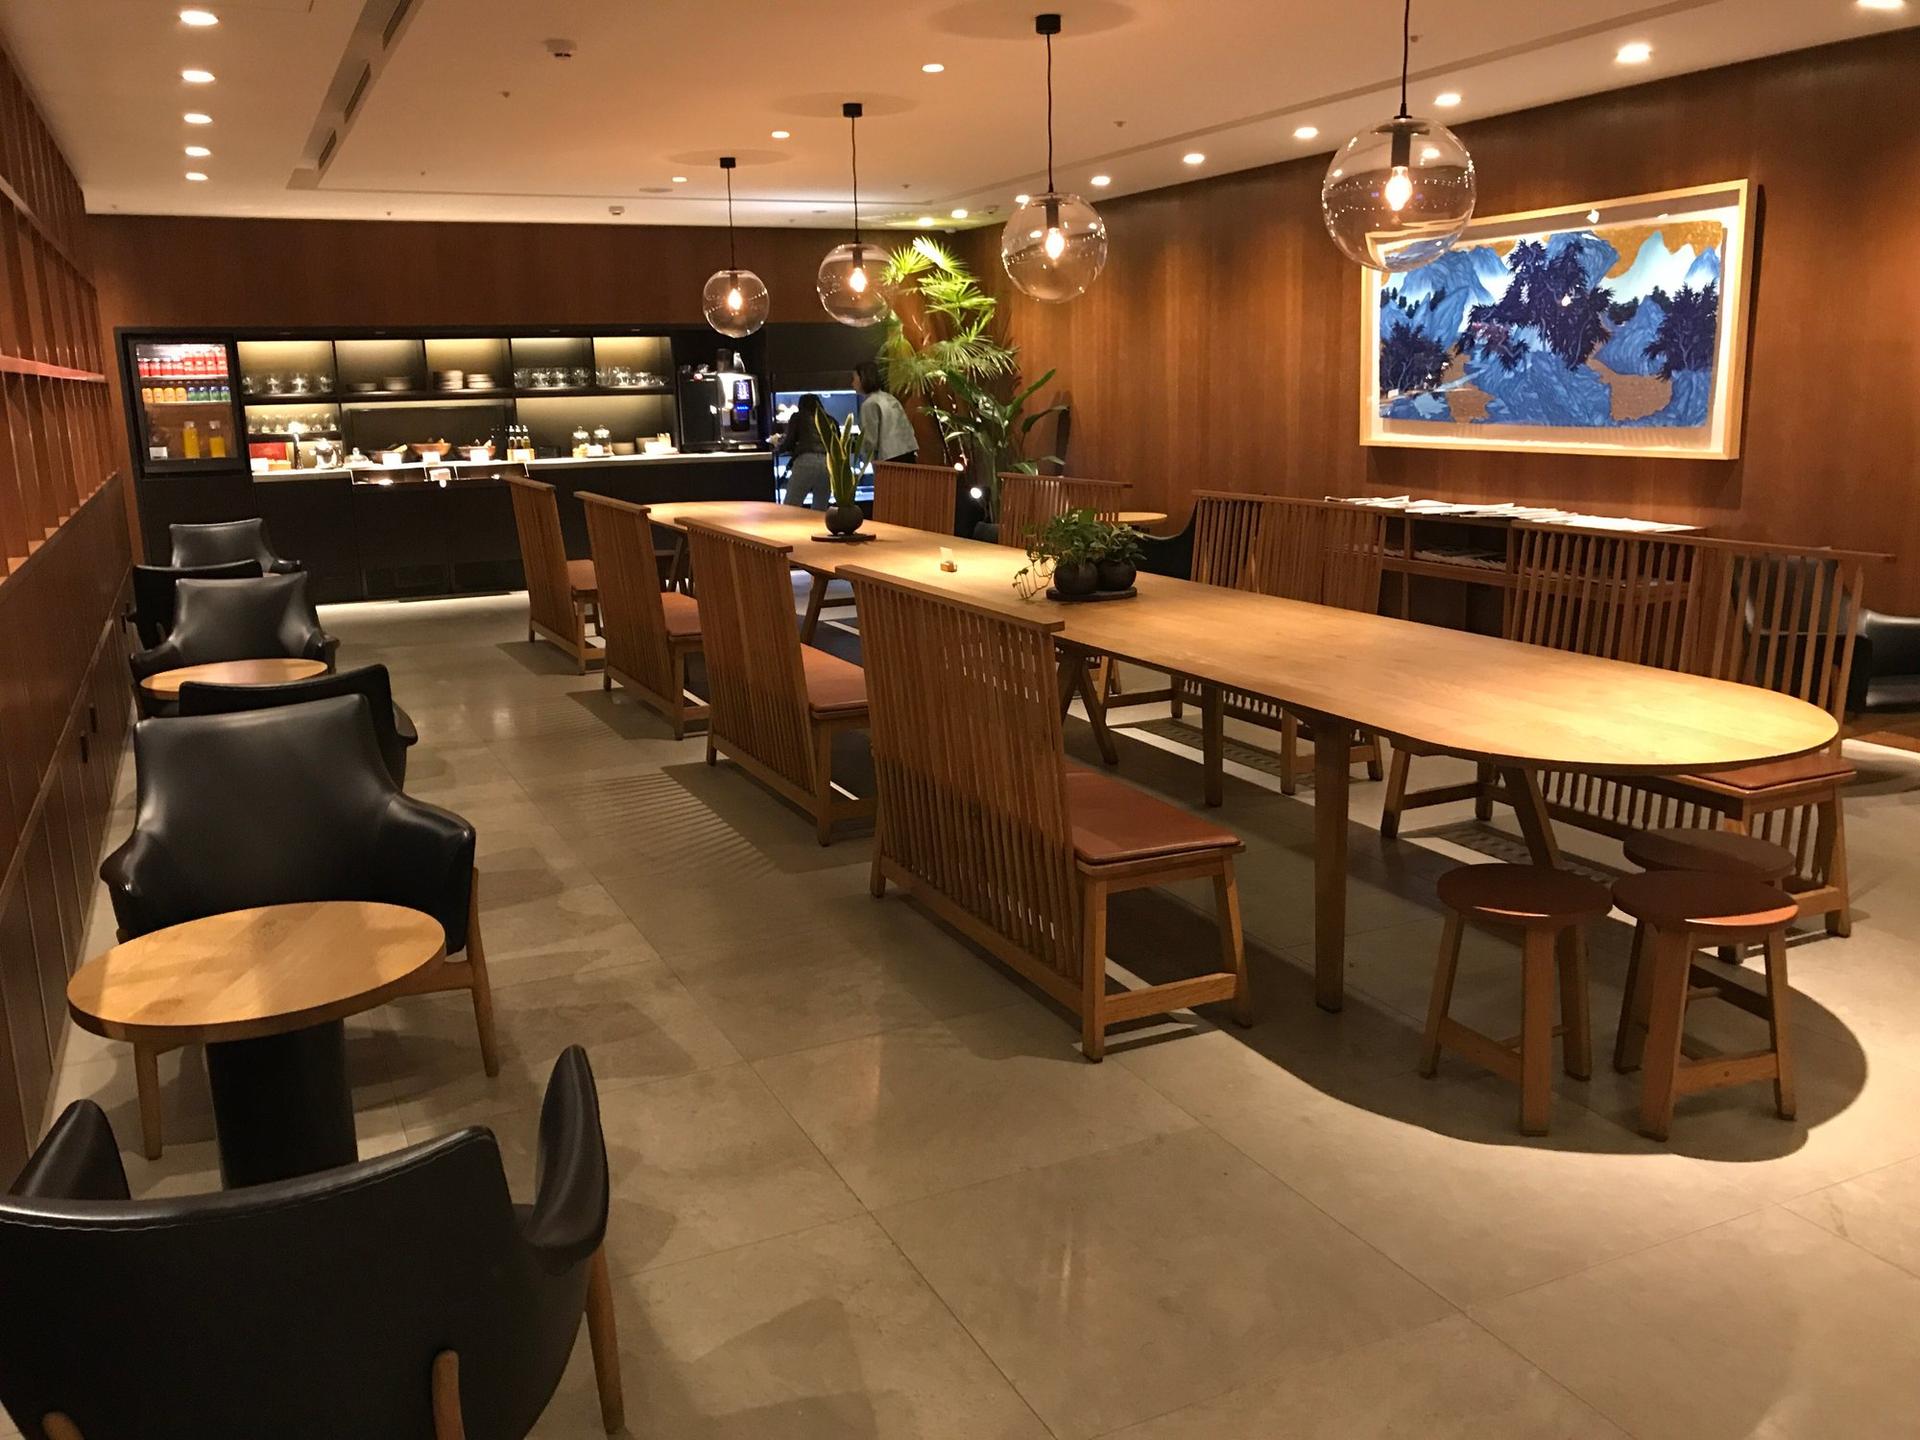 Cathay Pacific Lounge image 31 of 37